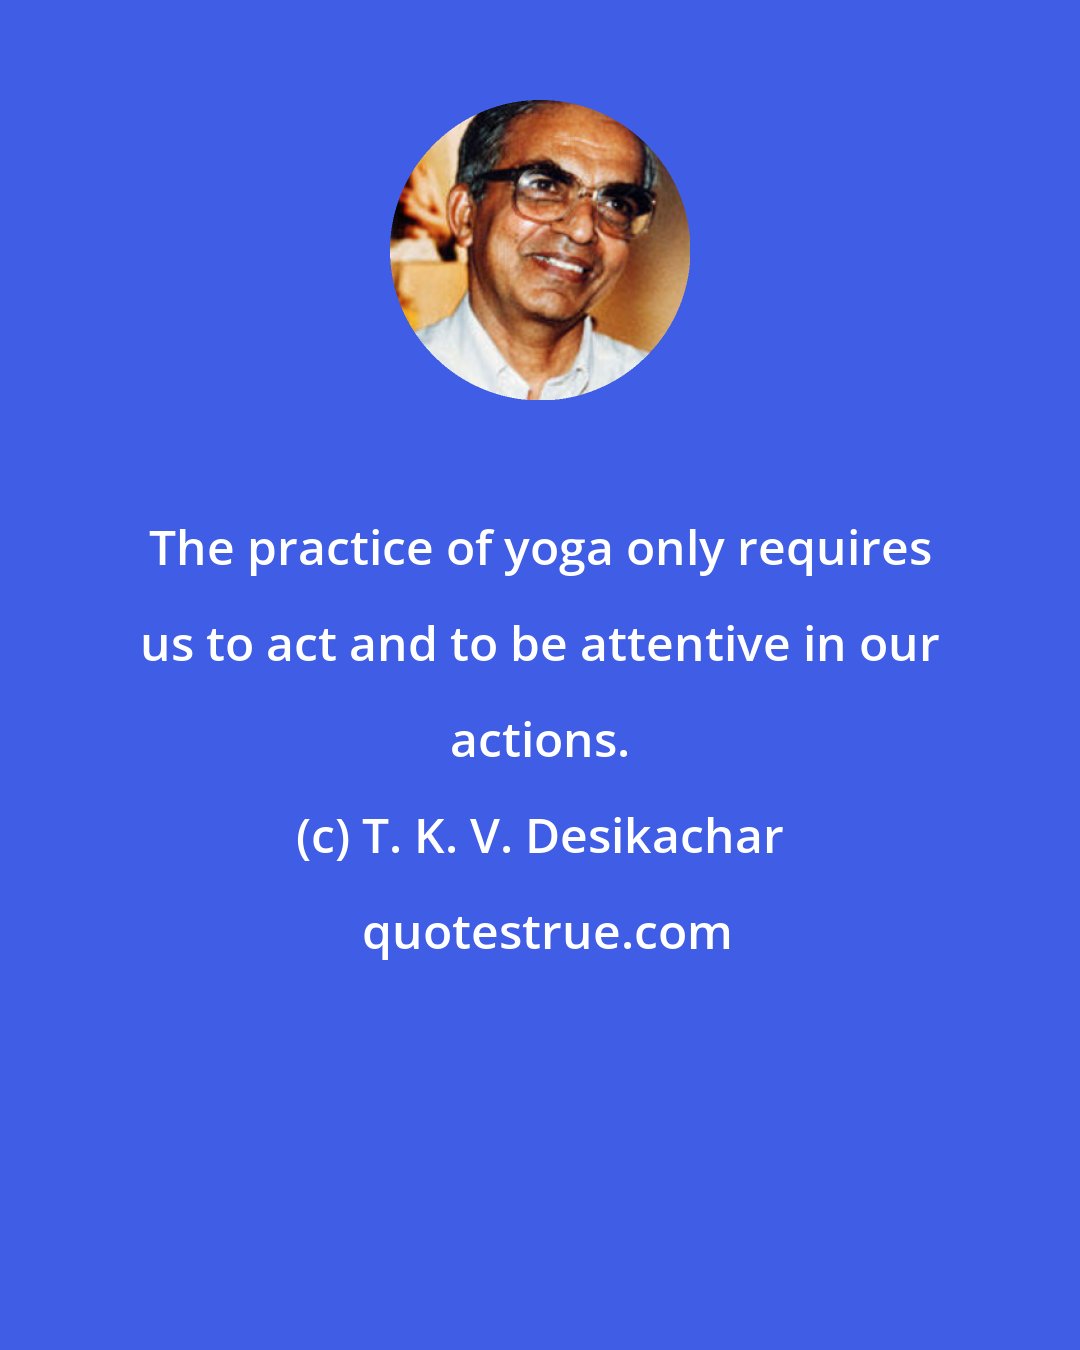 T. K. V. Desikachar: The practice of yoga only requires us to act and to be attentive in our actions.